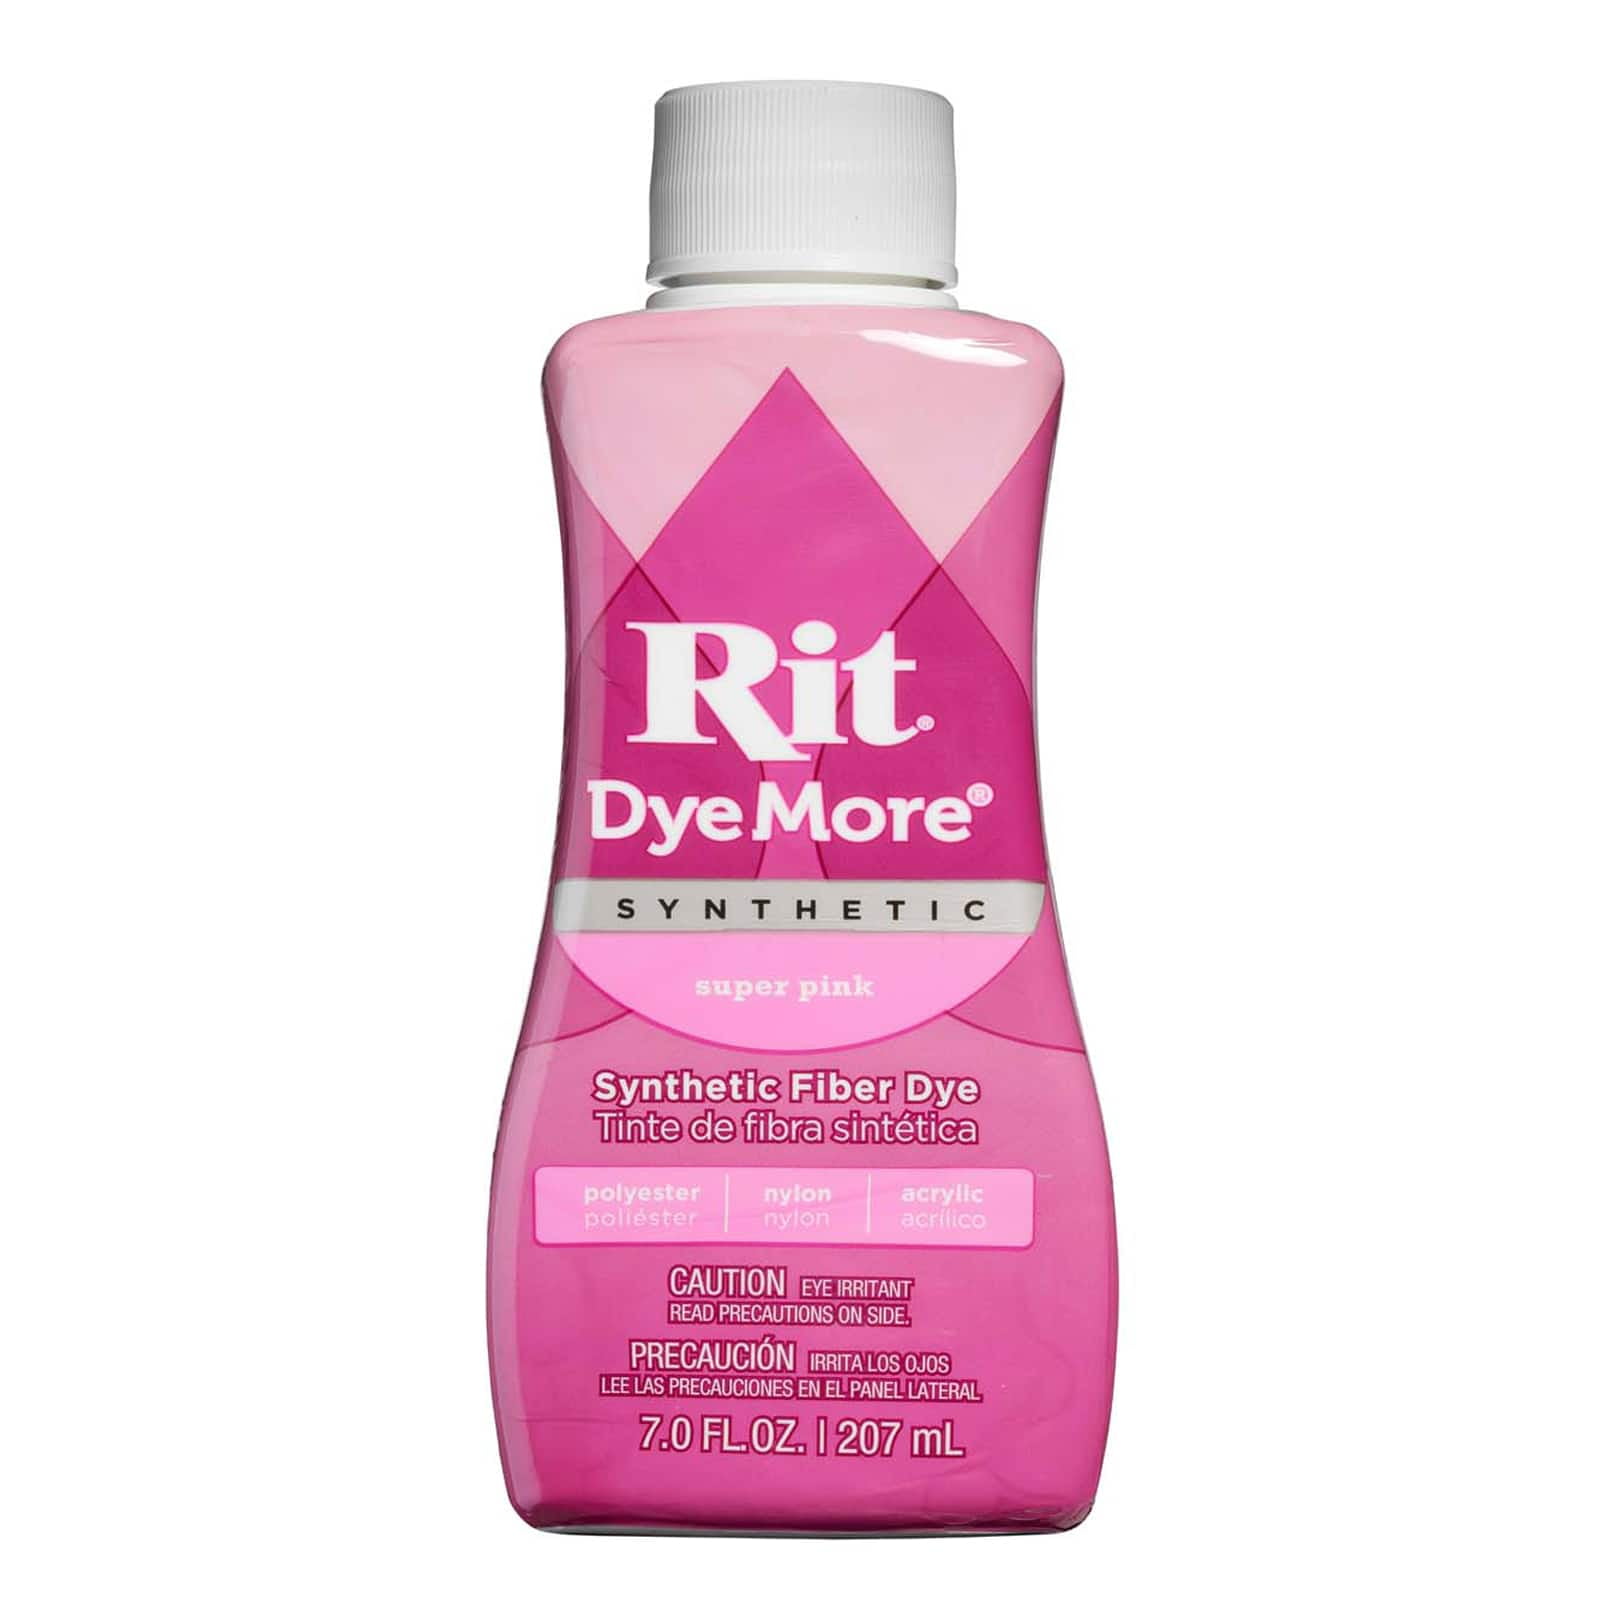 Rit DyeMore Synthetic Fabric Dye – Bobbin and Ink